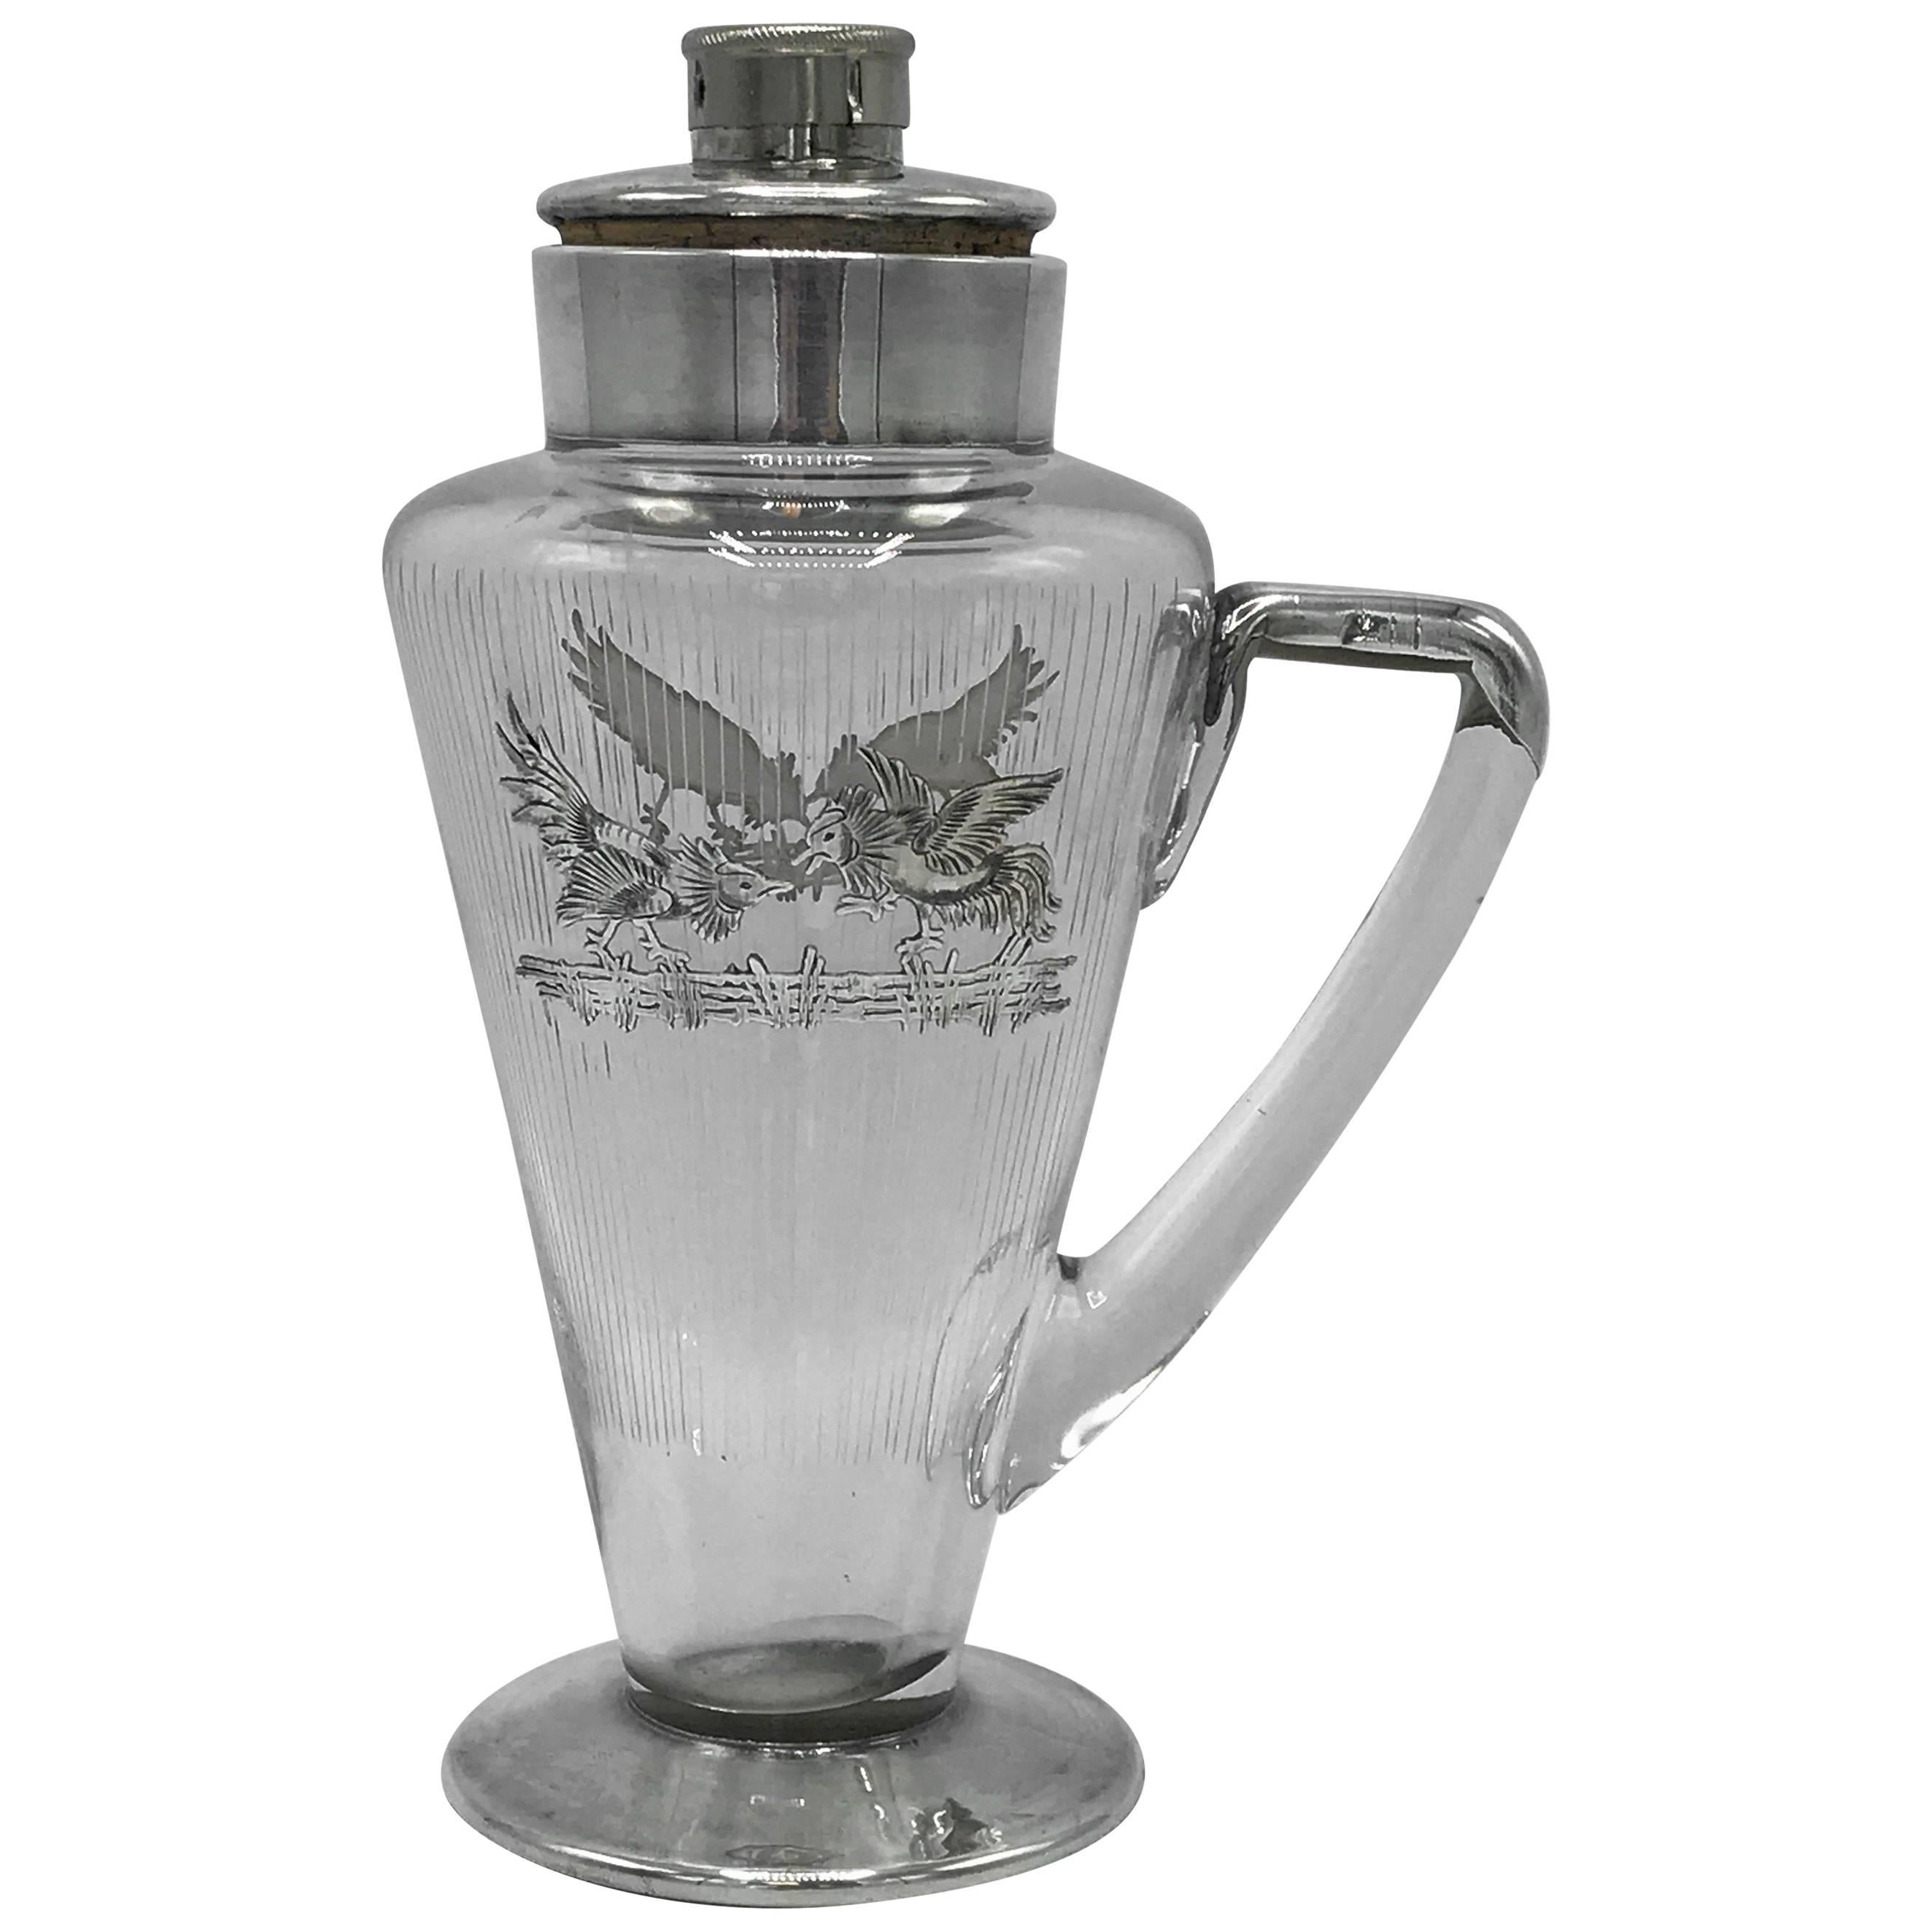 1930s Glass and Sterling Silver Decanter Carafe with Rooster Motif